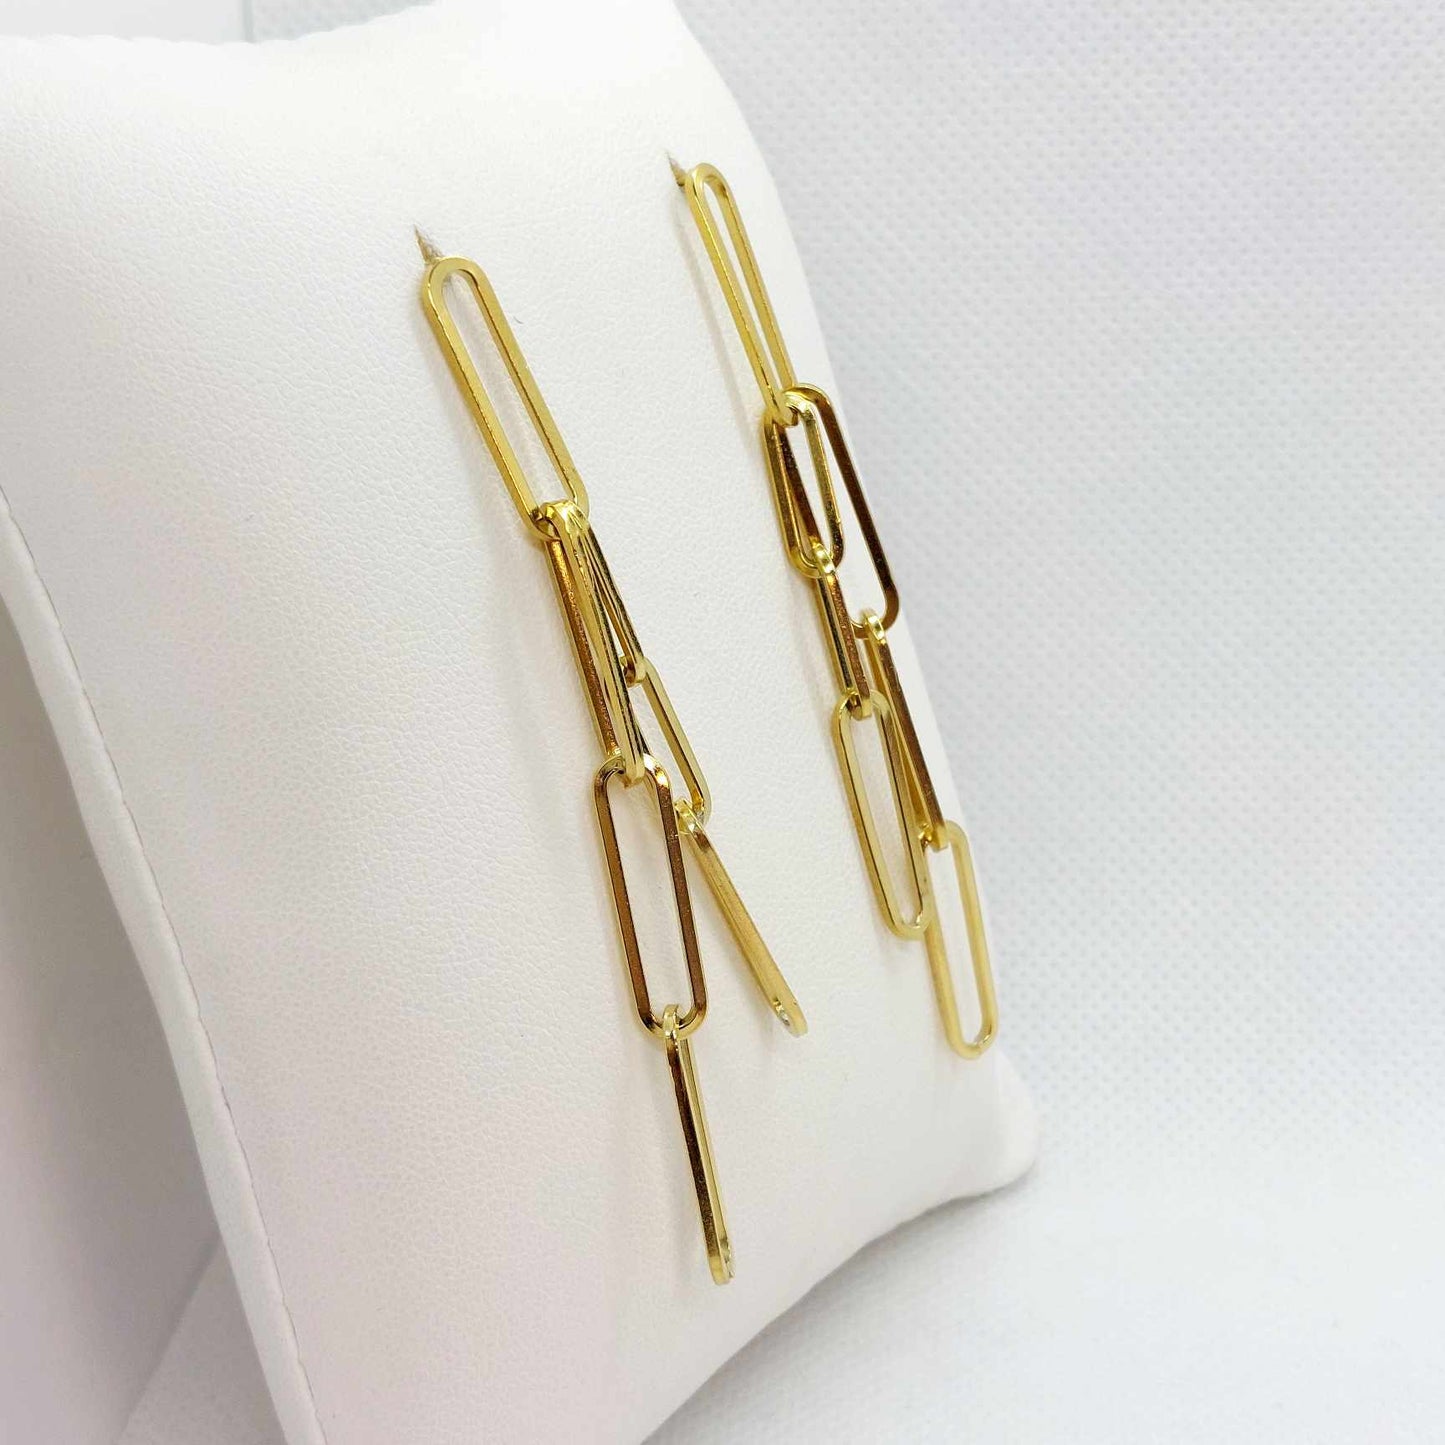 Dangle Stud Earrings Stainless Steel Gold Plated